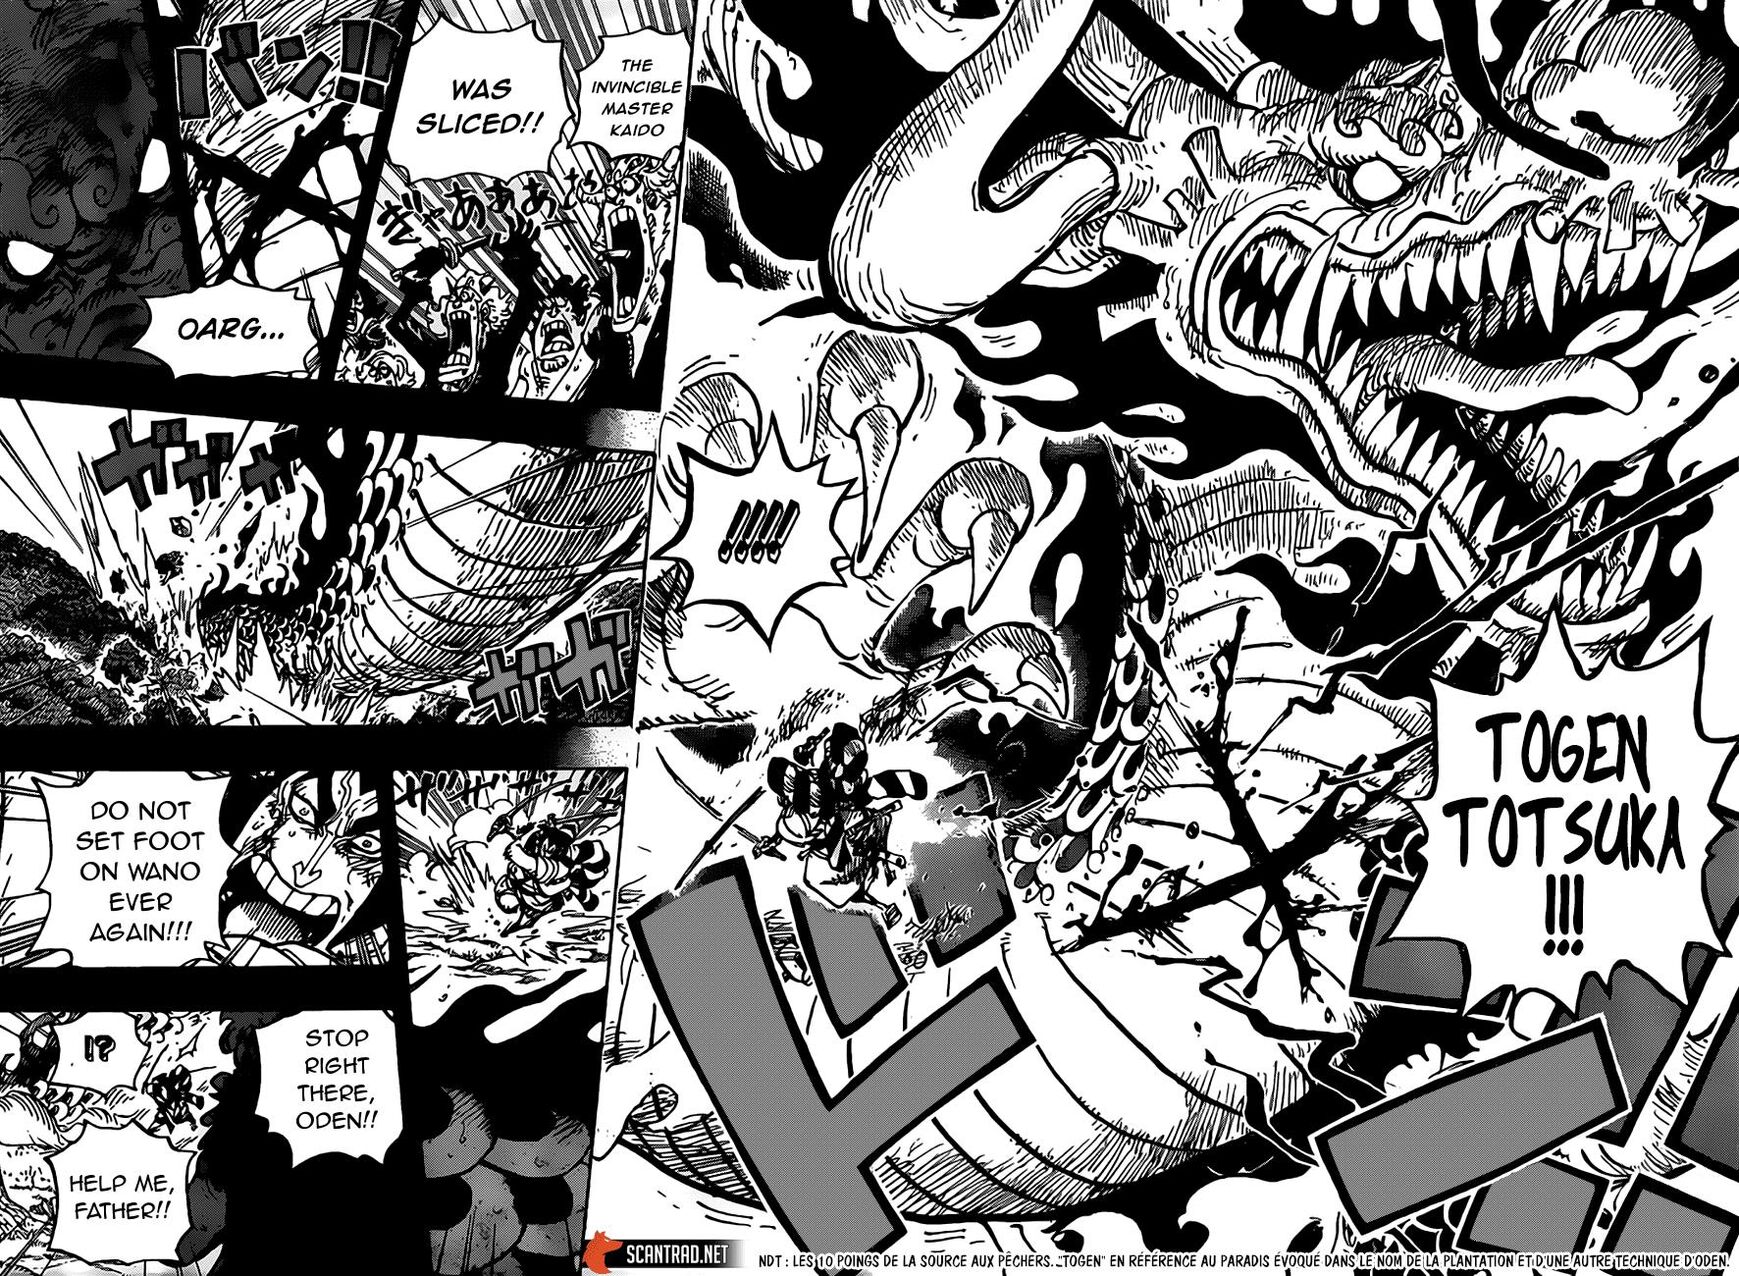 One Piece, Chapter 970 - Vol.69 Ch.970 image 12